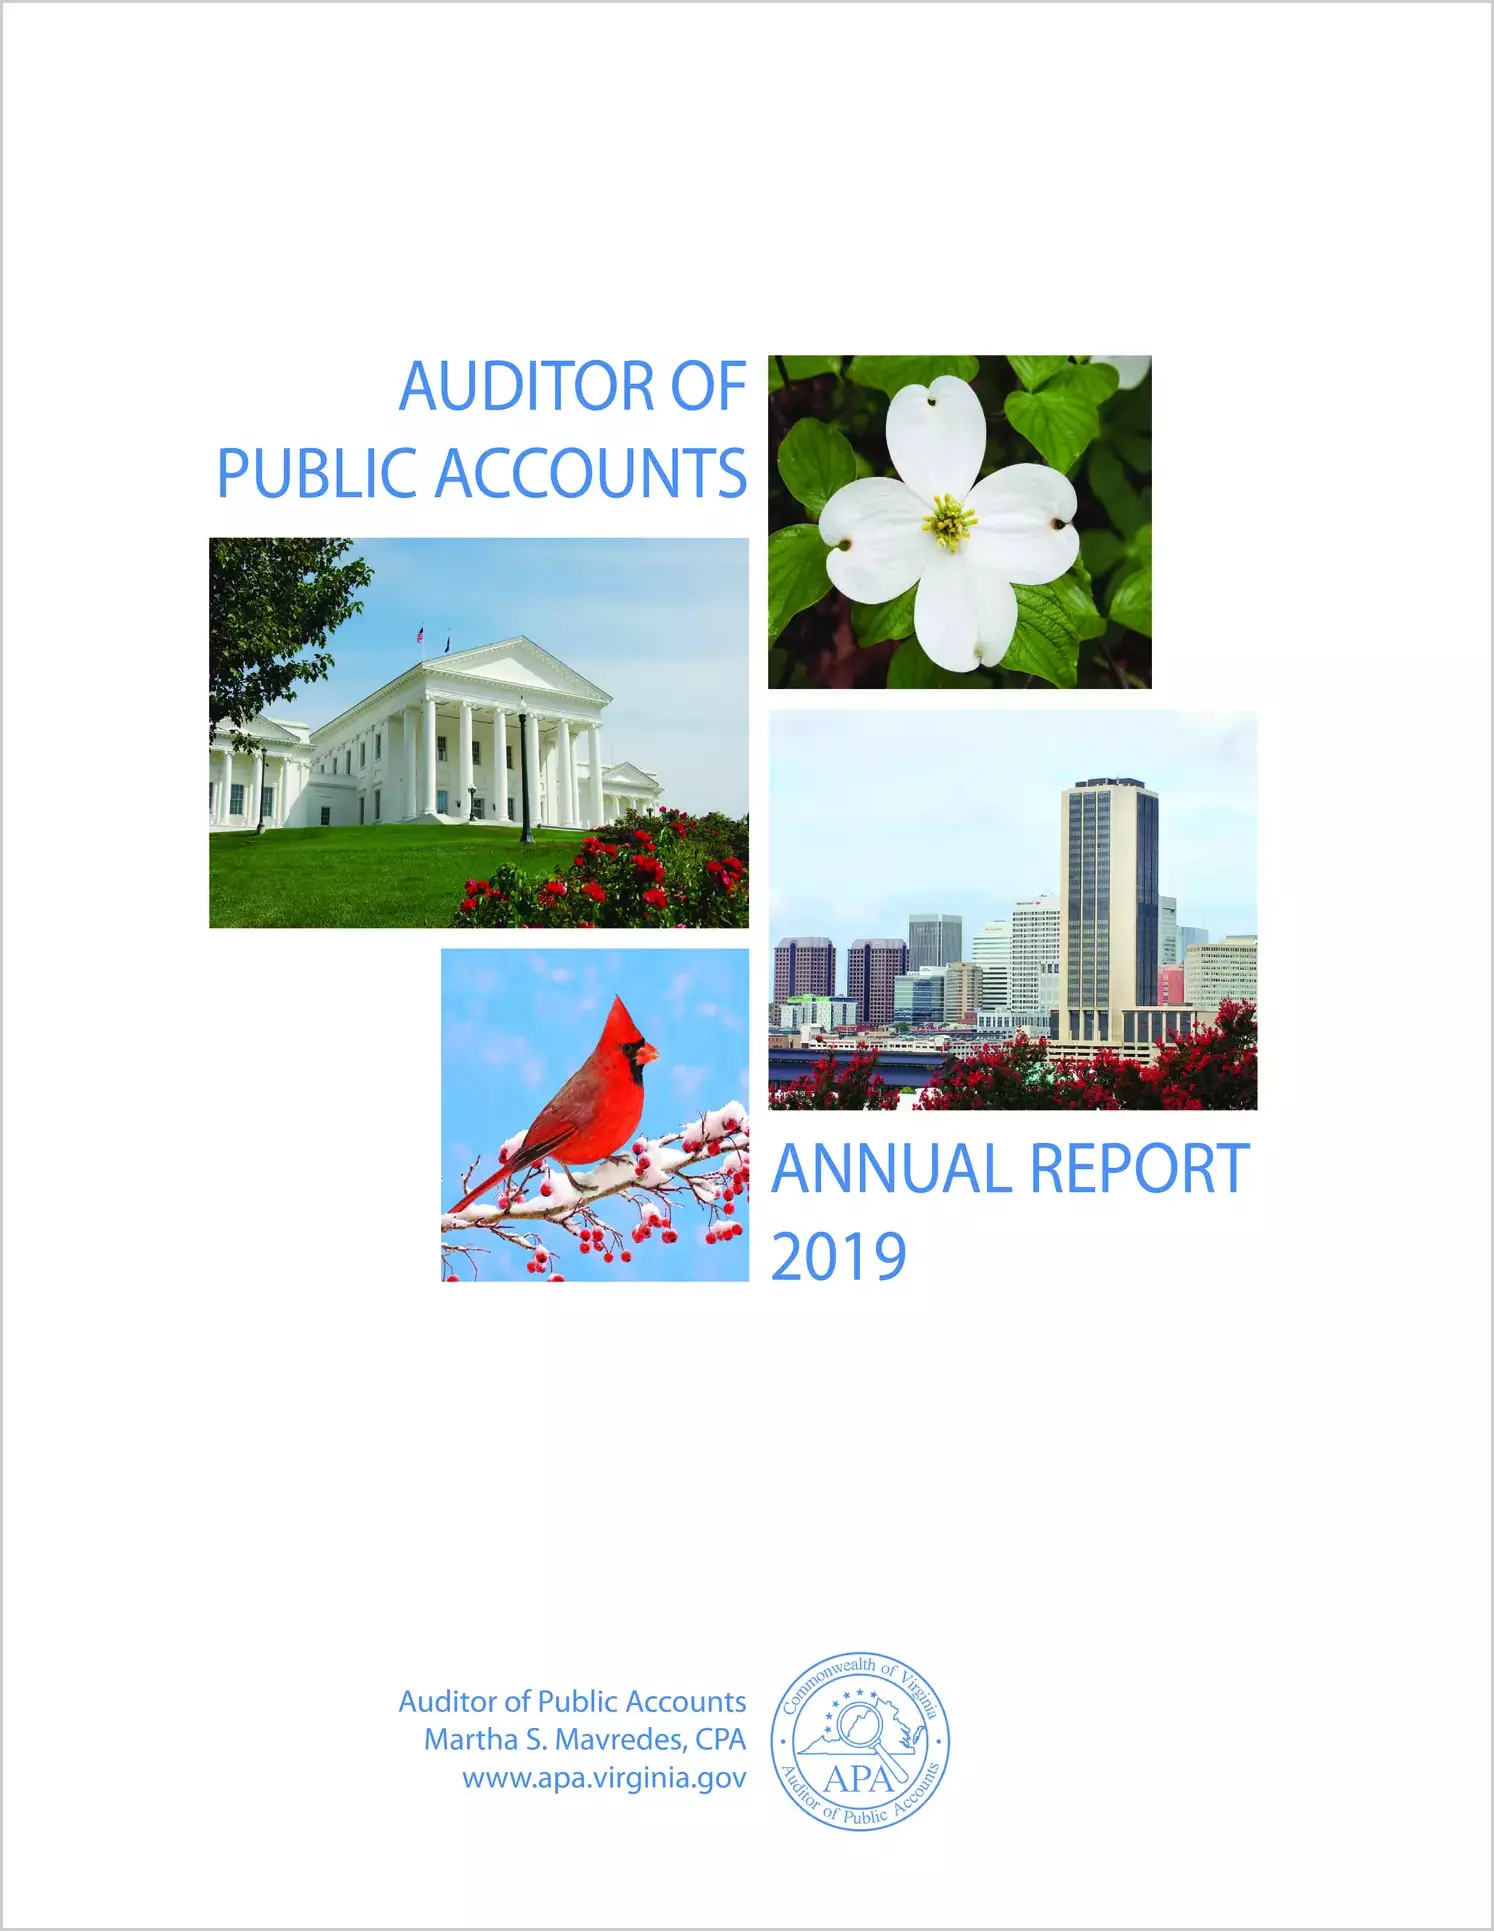 2019 Annual Report of the Auditor of Public Accounts